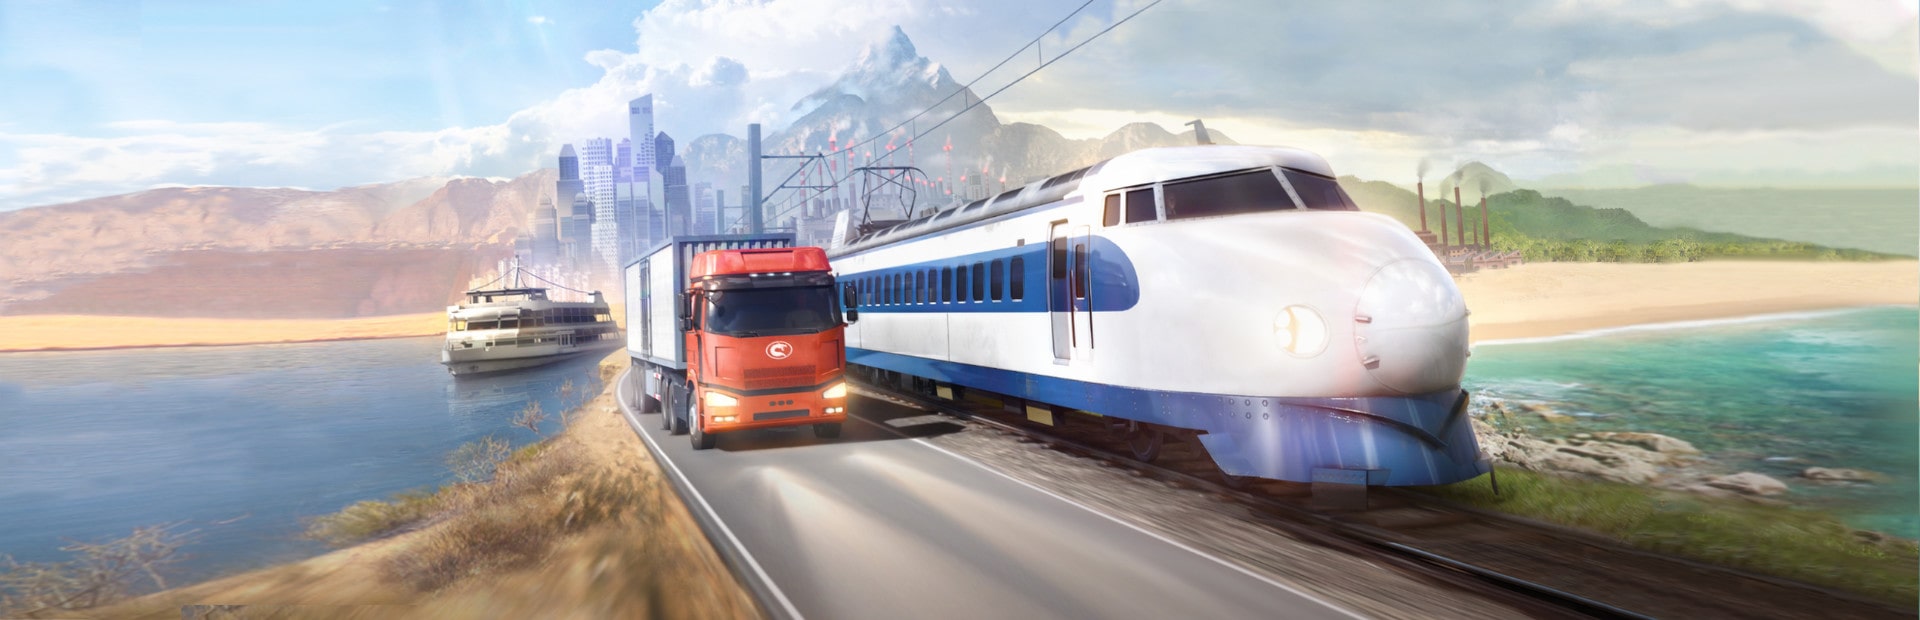 Transport Fever 2 PC Review: A Game That Builds On The Original